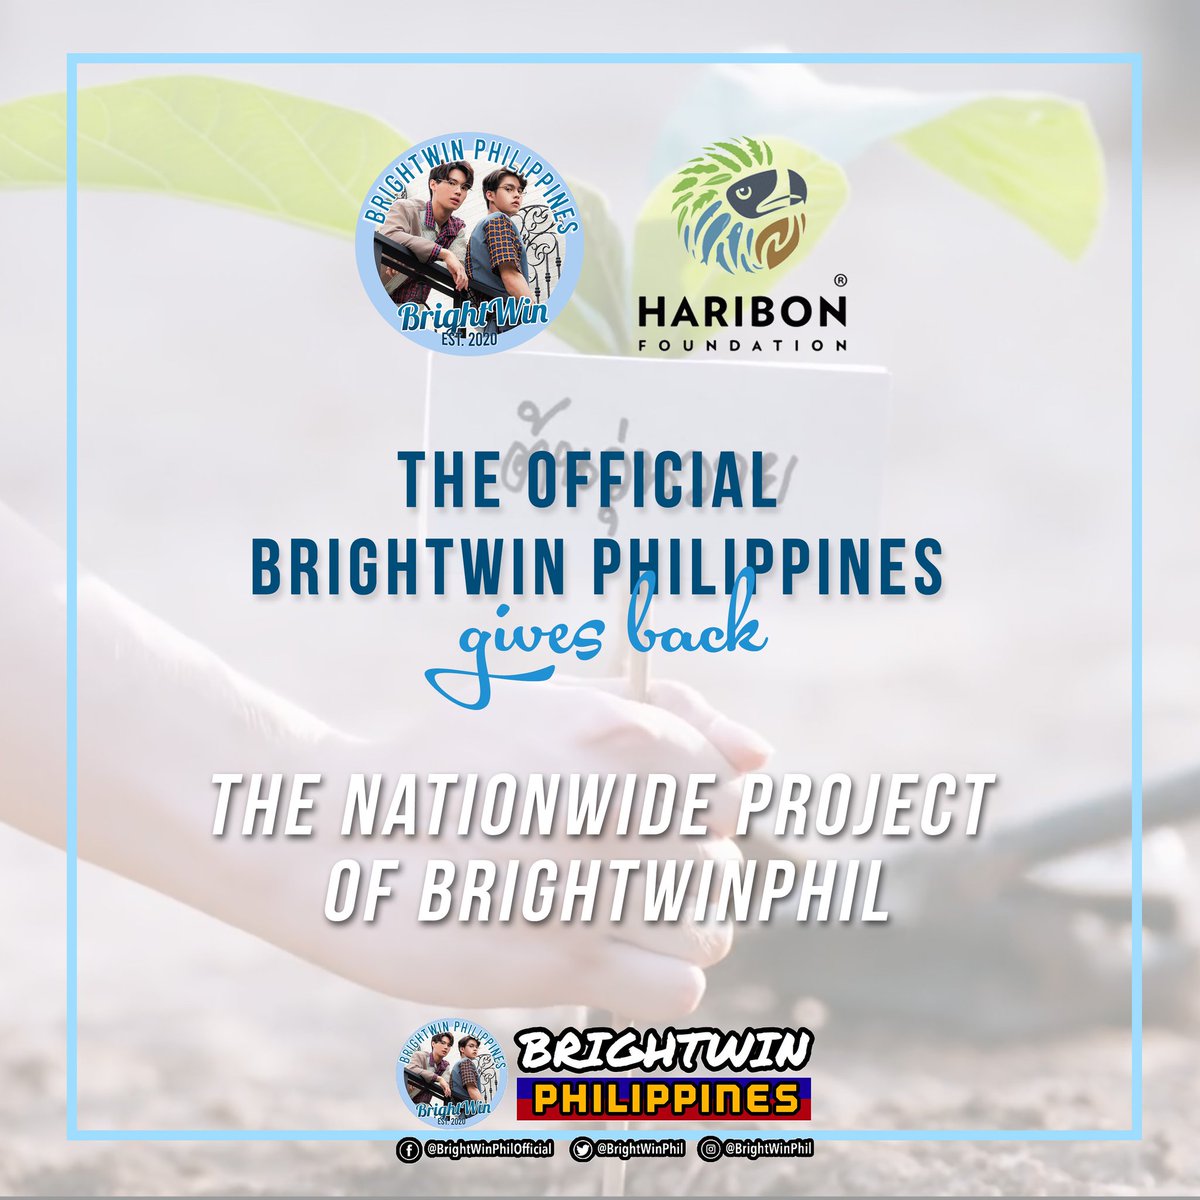 Saan ka man ay TUTULONG TAYO! It's OUR TIME to give back, BrightWins! After fulfilling our mission in 2Gether Forever With This Tumbler Project, we decided to EXPAND & REACH OUT GREATER HORIZONS, in the name of BrightWin! Sa Luzon, Visayas, at Mindanao. KAMI’Y KASAMA NIYO 